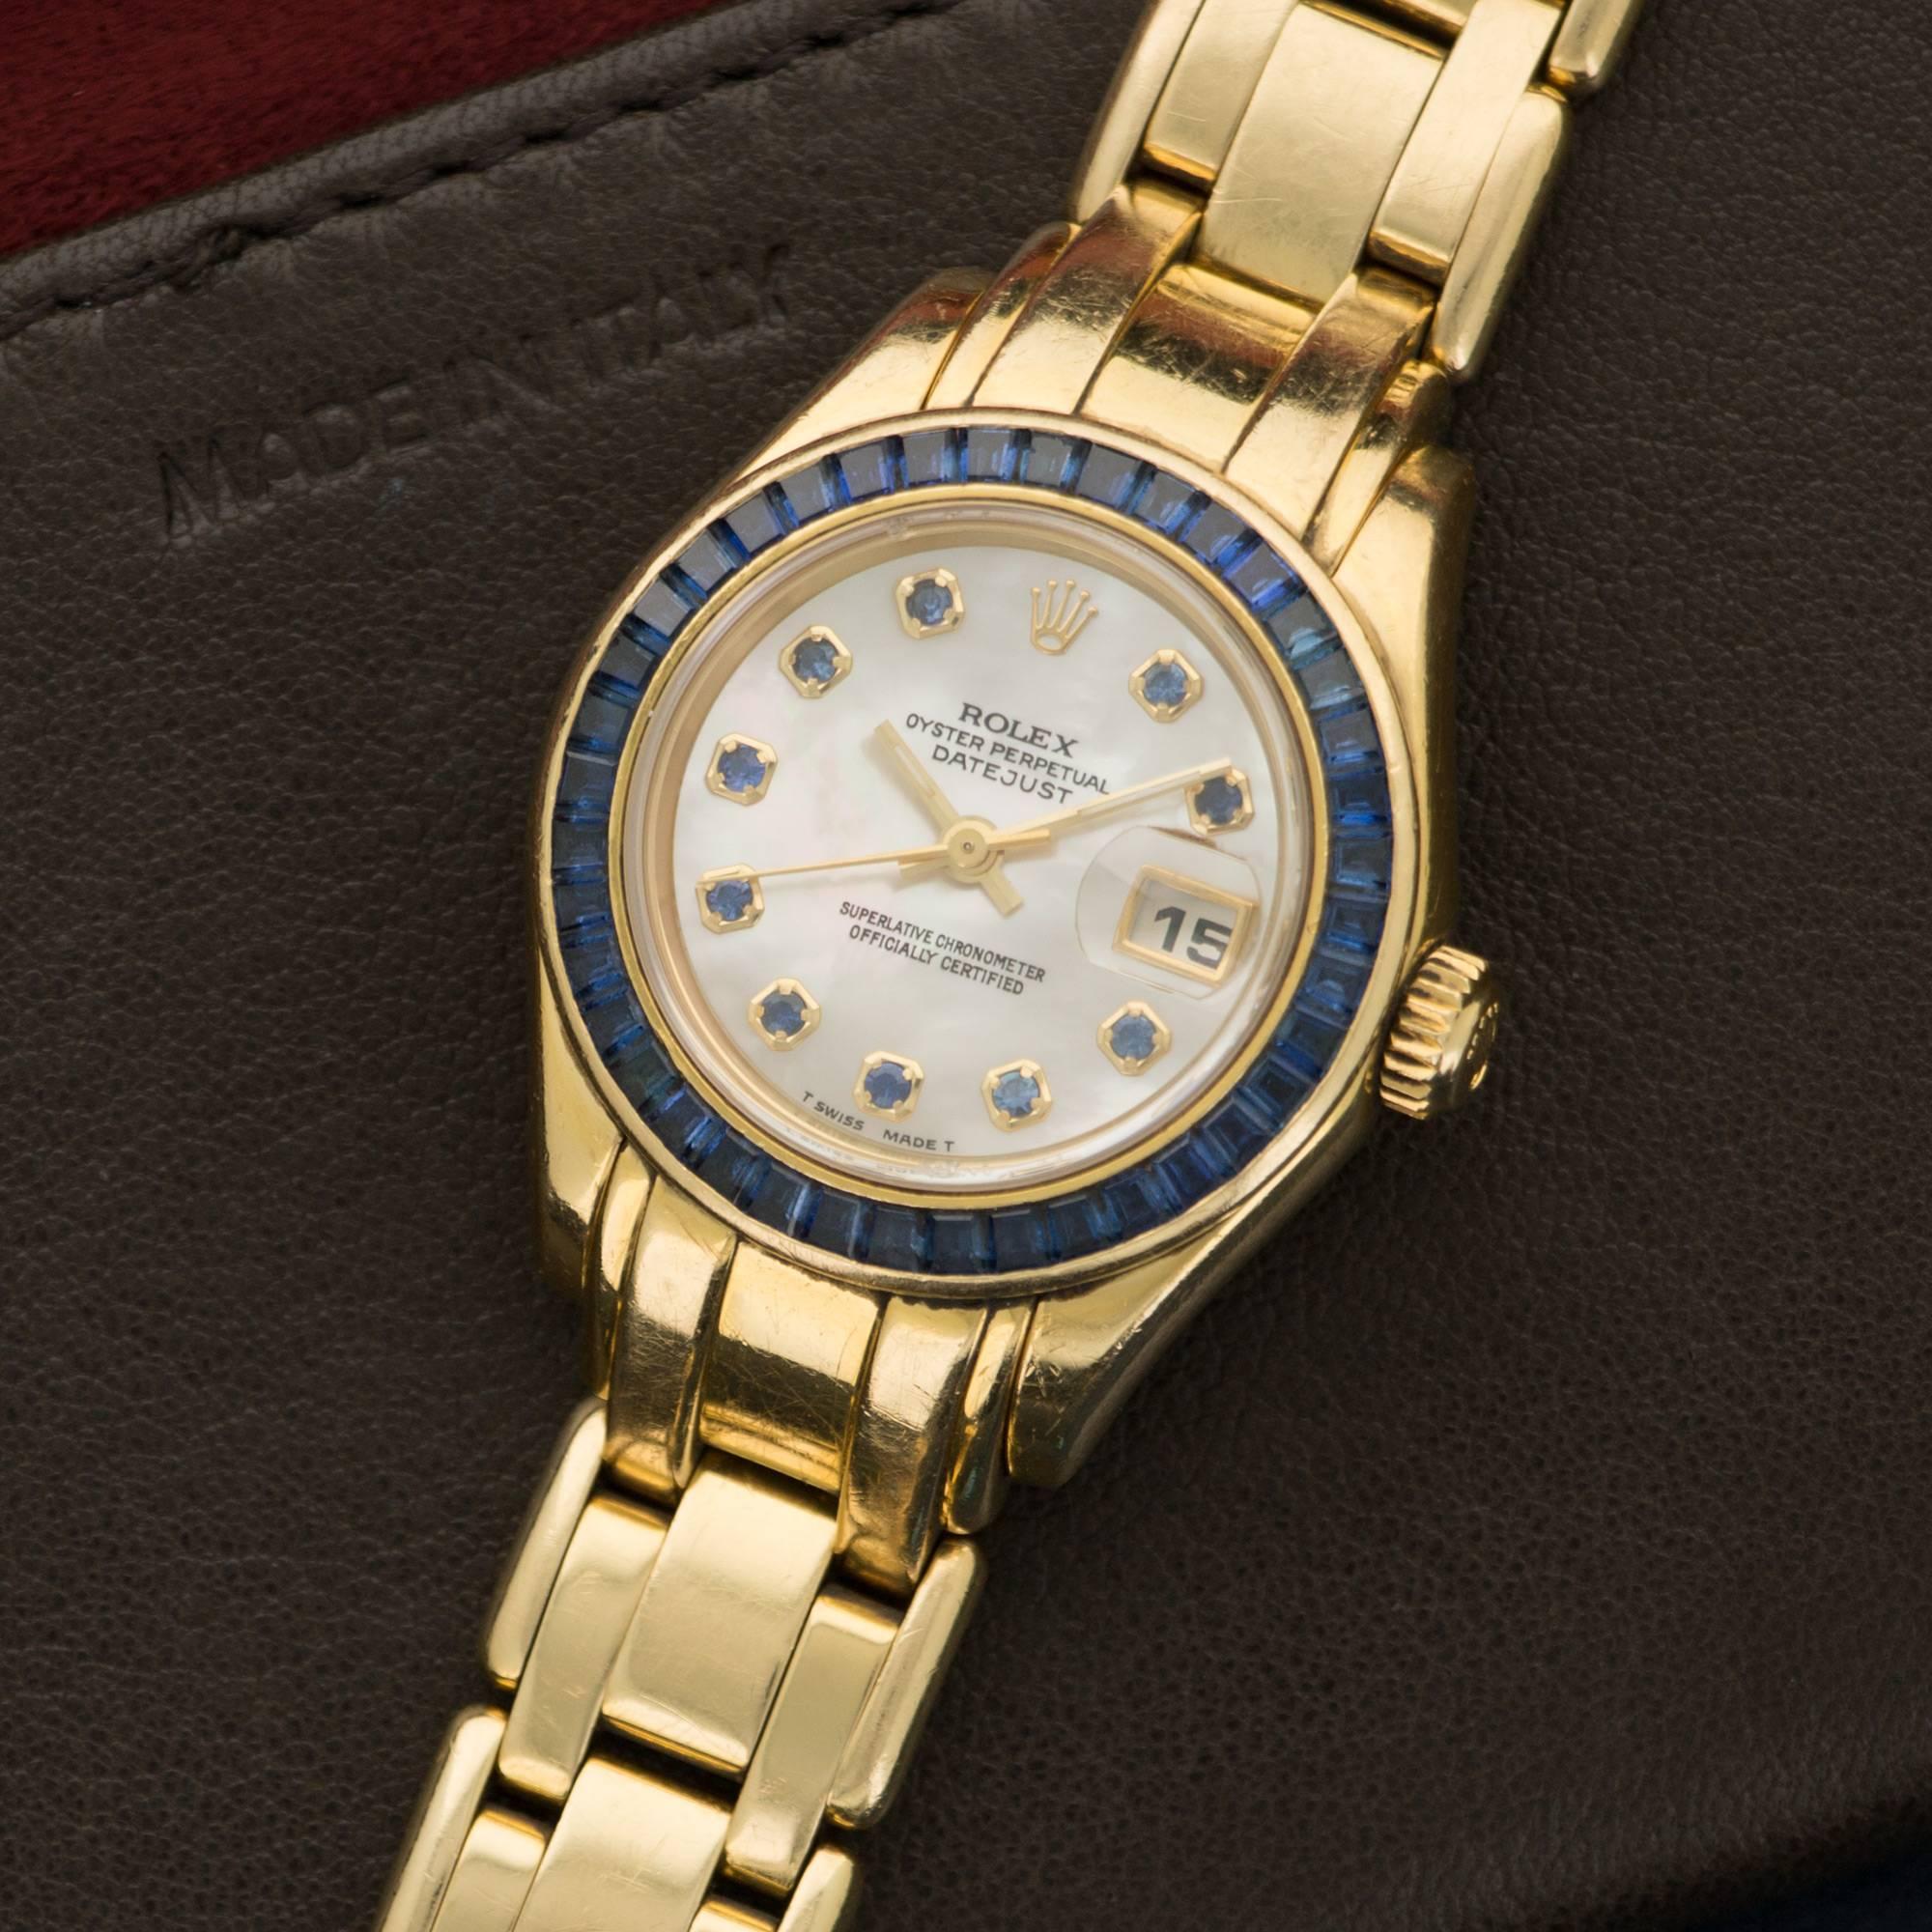 An Beautiful 18k Yellow Gold Rolex "Pearlmaster" Model with Original Square-Cut Sapphire Bezel and Mother of Pearl Dial. All Original. Model Number 69308. Circa Early 1990's .